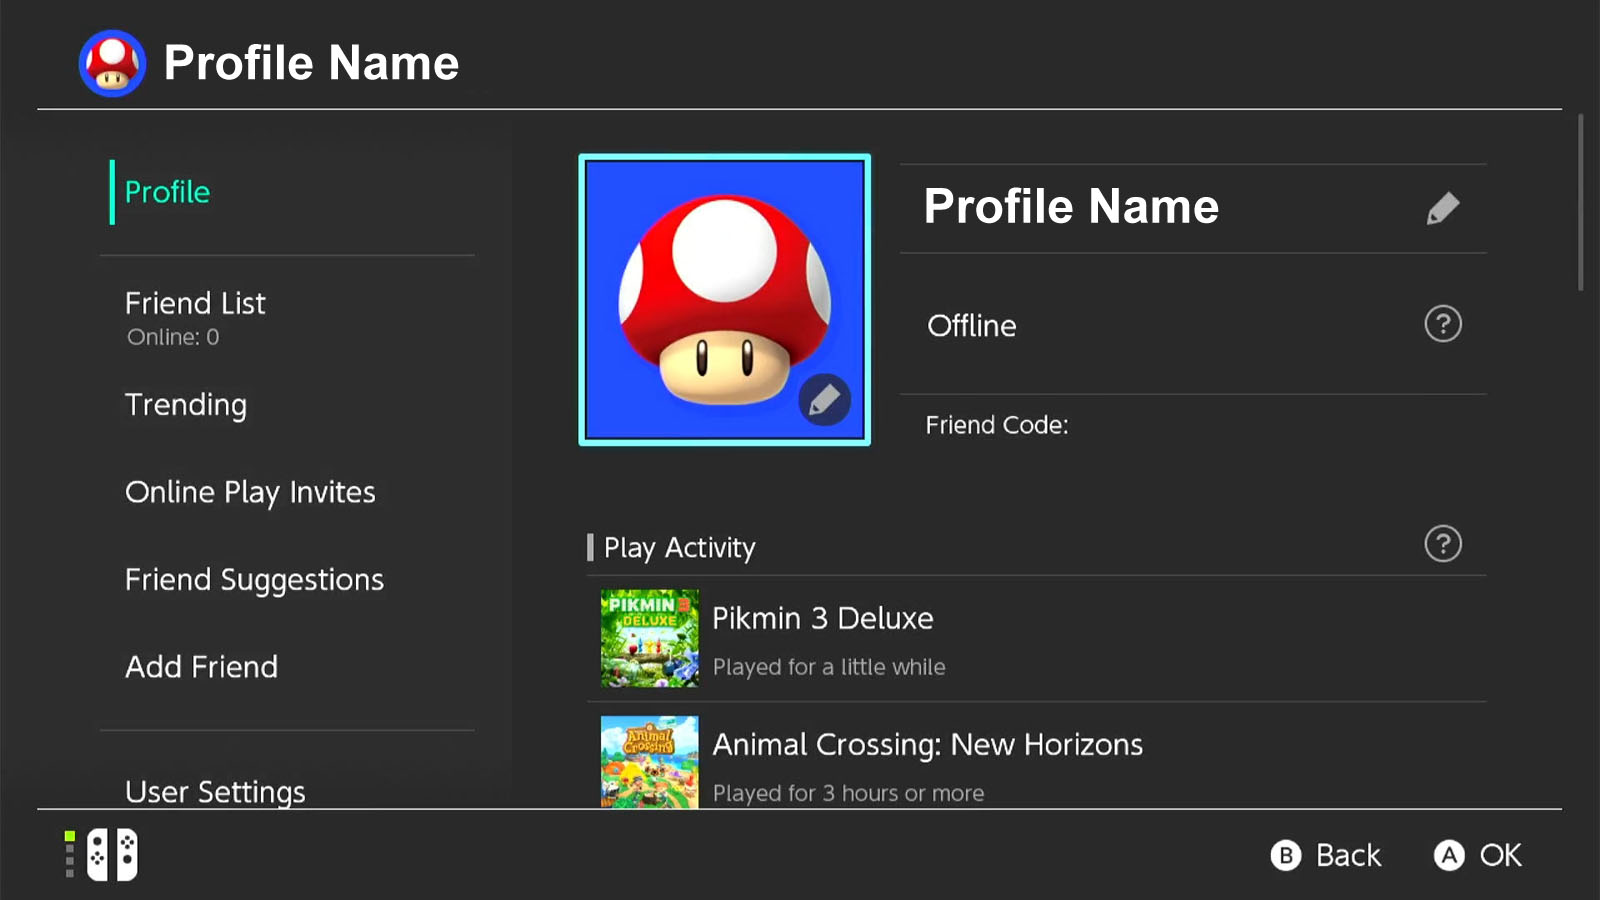 Nintendo Switch profile settings screen with a row of options on the left and the profile picture in to the right